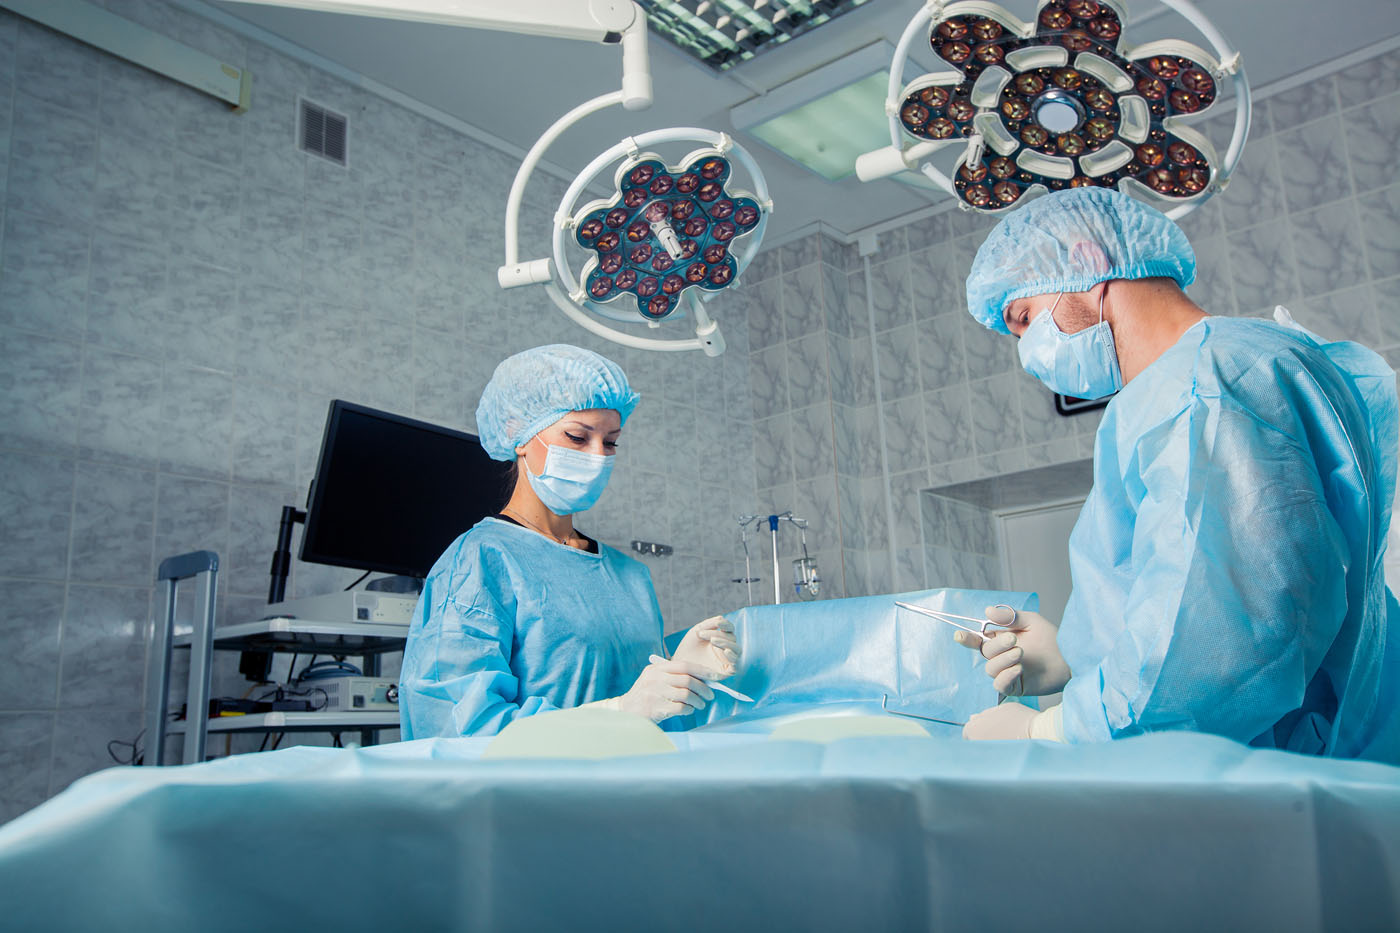 Surgical Directions reduced average repair costs by 60% for Advocate BroMenn Medical Center. Read the healthcare performance improvement case study.